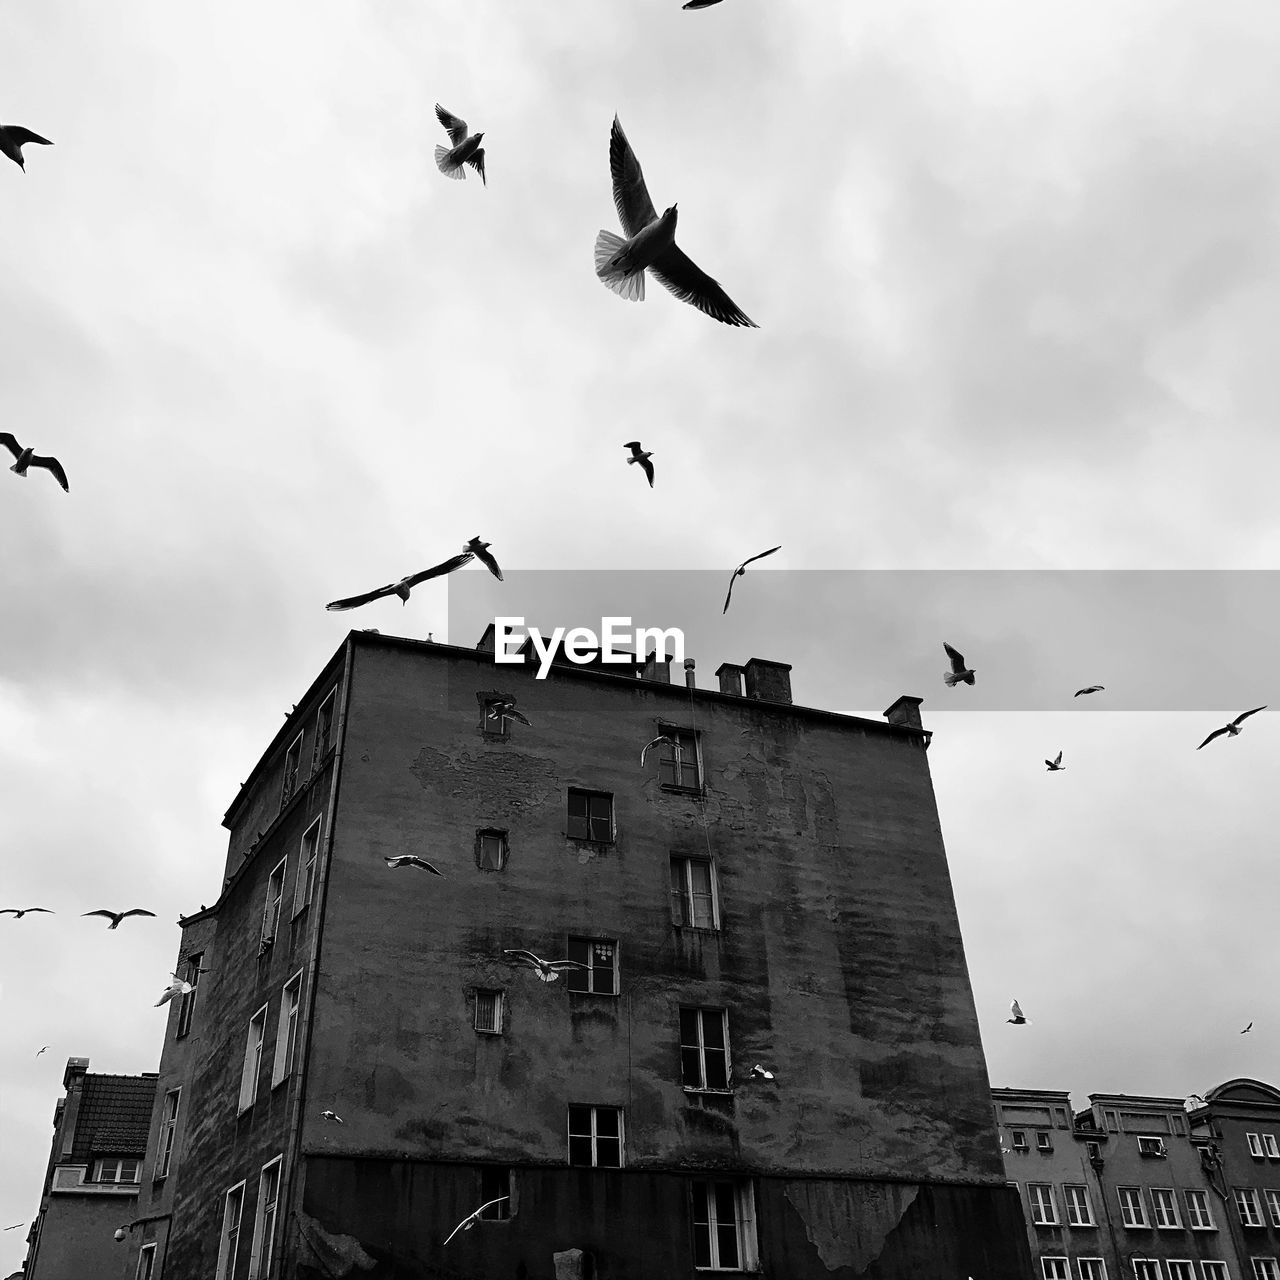 LOW ANGLE VIEW OF BIRDS FLYING IN BUILDING